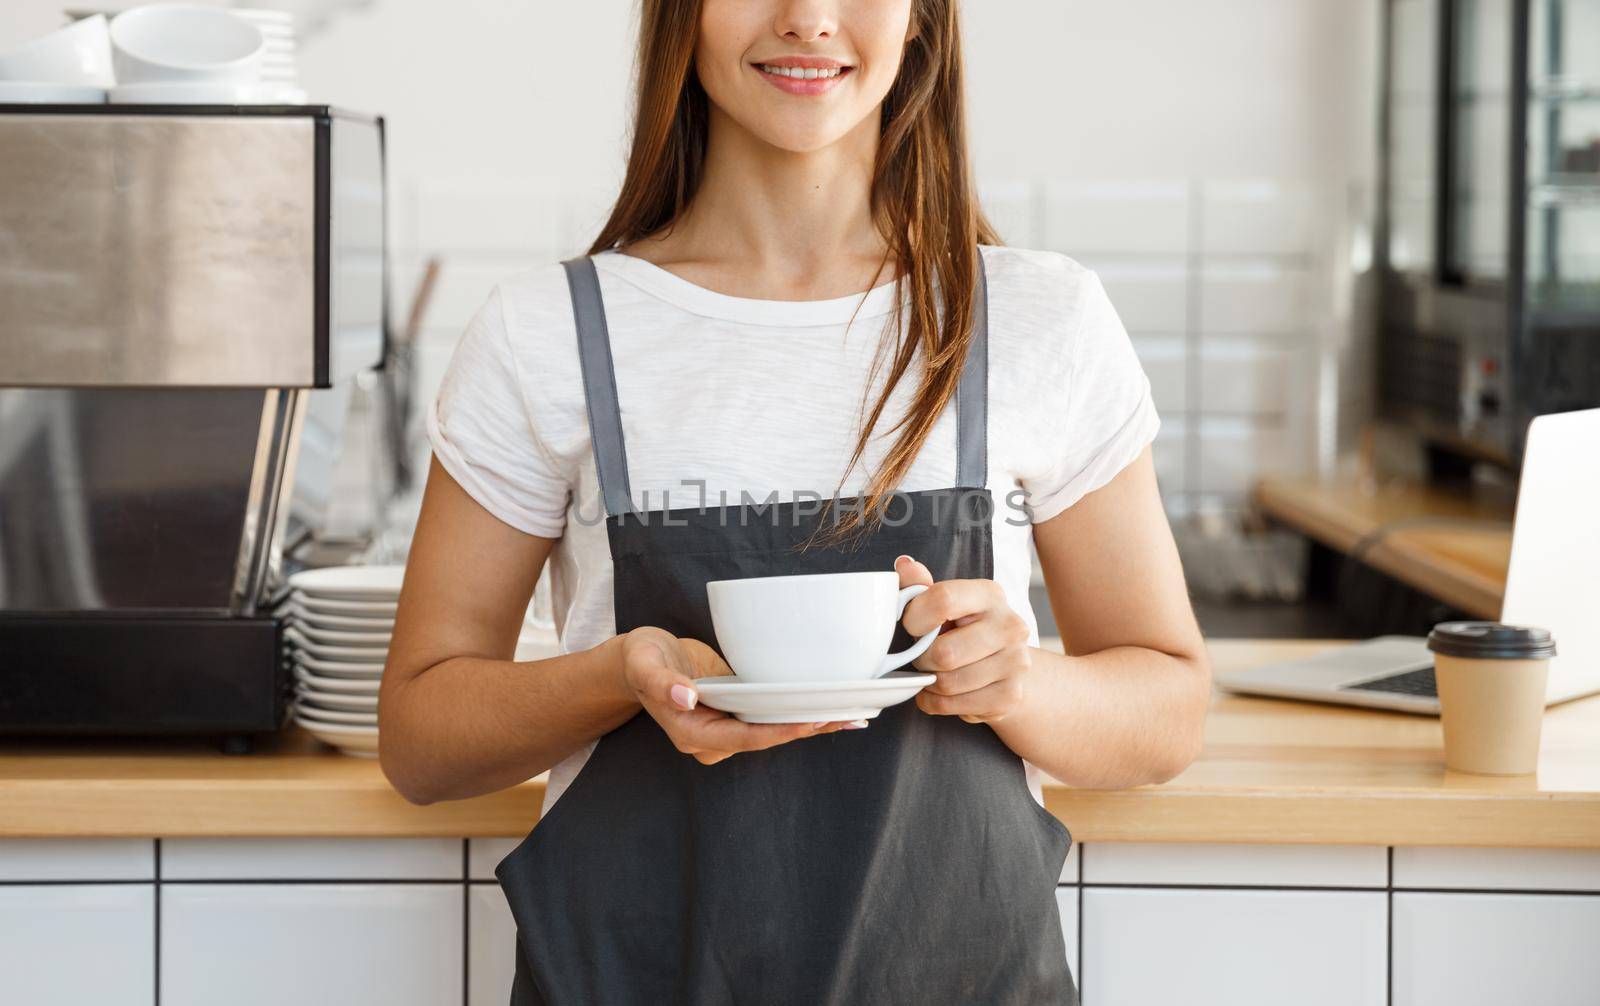 Coffee Business Concept - Caucasian female serving coffee while standing in coffee shop. Focus on female hands placing a cup of coffee.